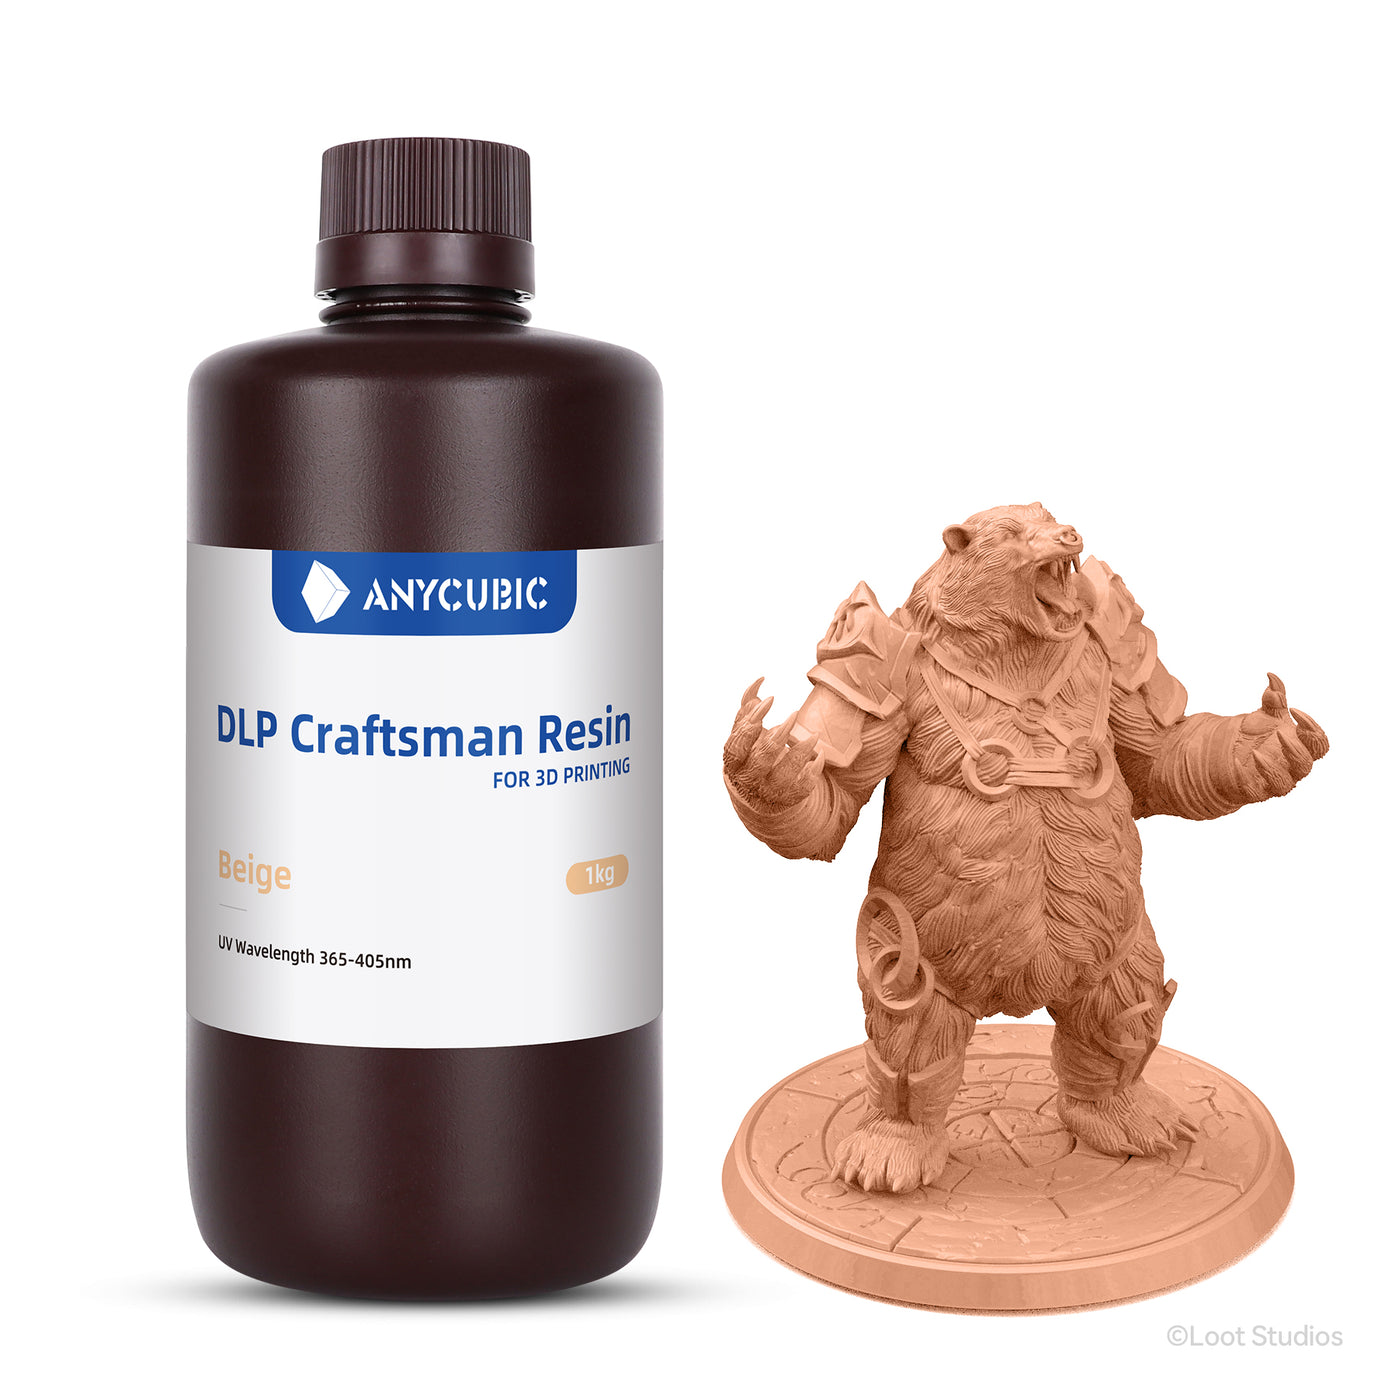 [Get 3 for the price of 2] Anycubic DLP Craftsman Resin